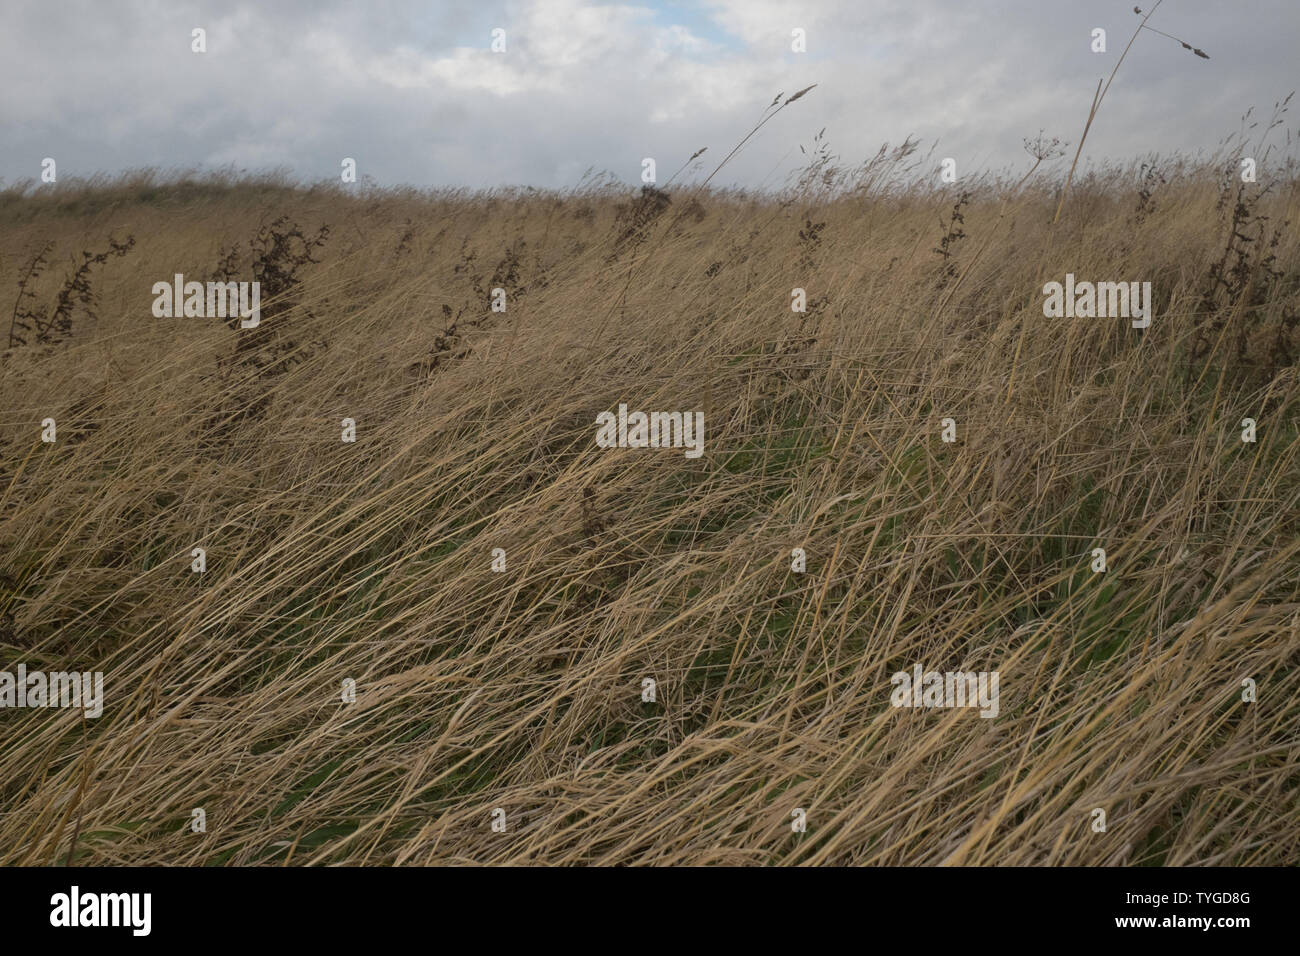 Sea grass blowing in the wind along the Elie coast, East Neuk, Fife, Scotland. Stock Photo